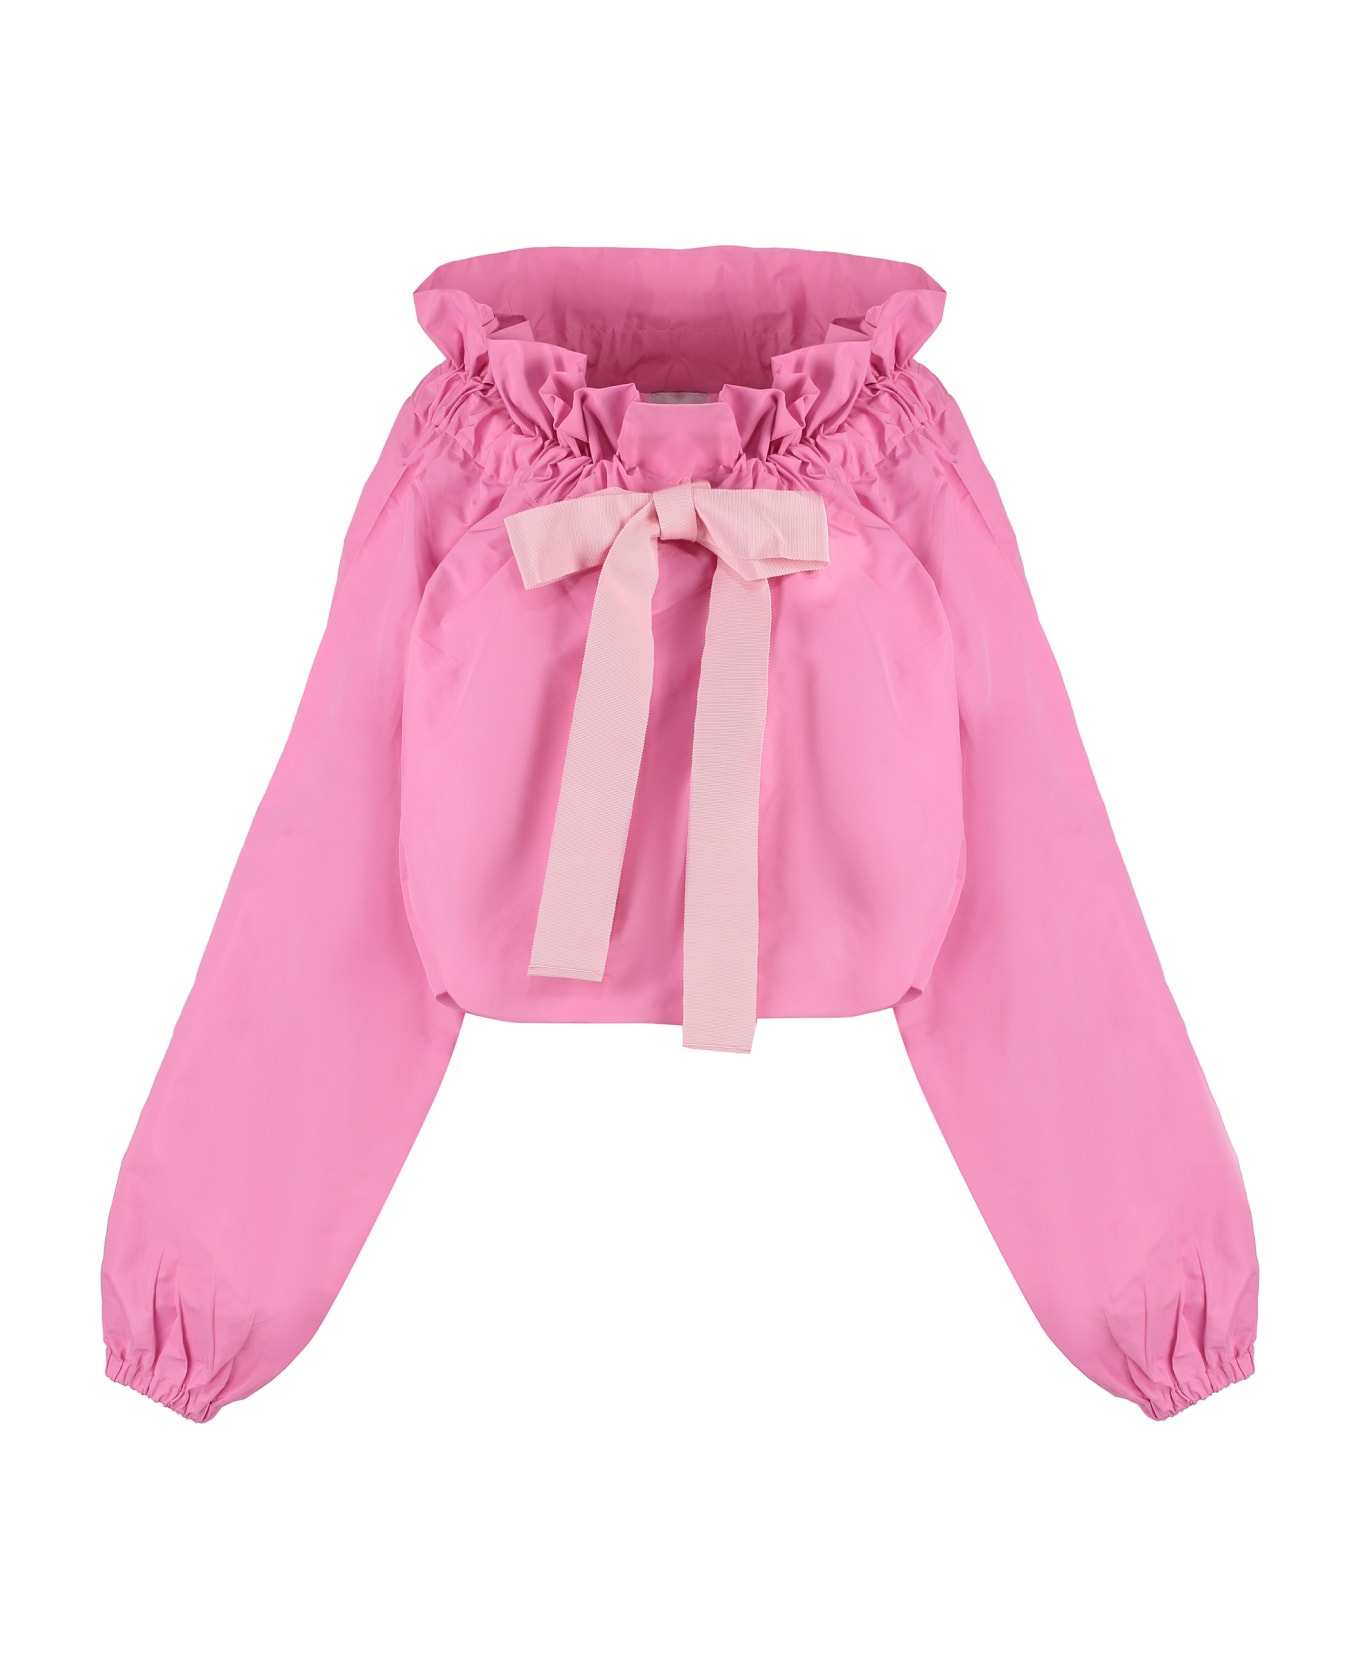 Patou Puffed Sleeves Blouse - Pink ブラウス